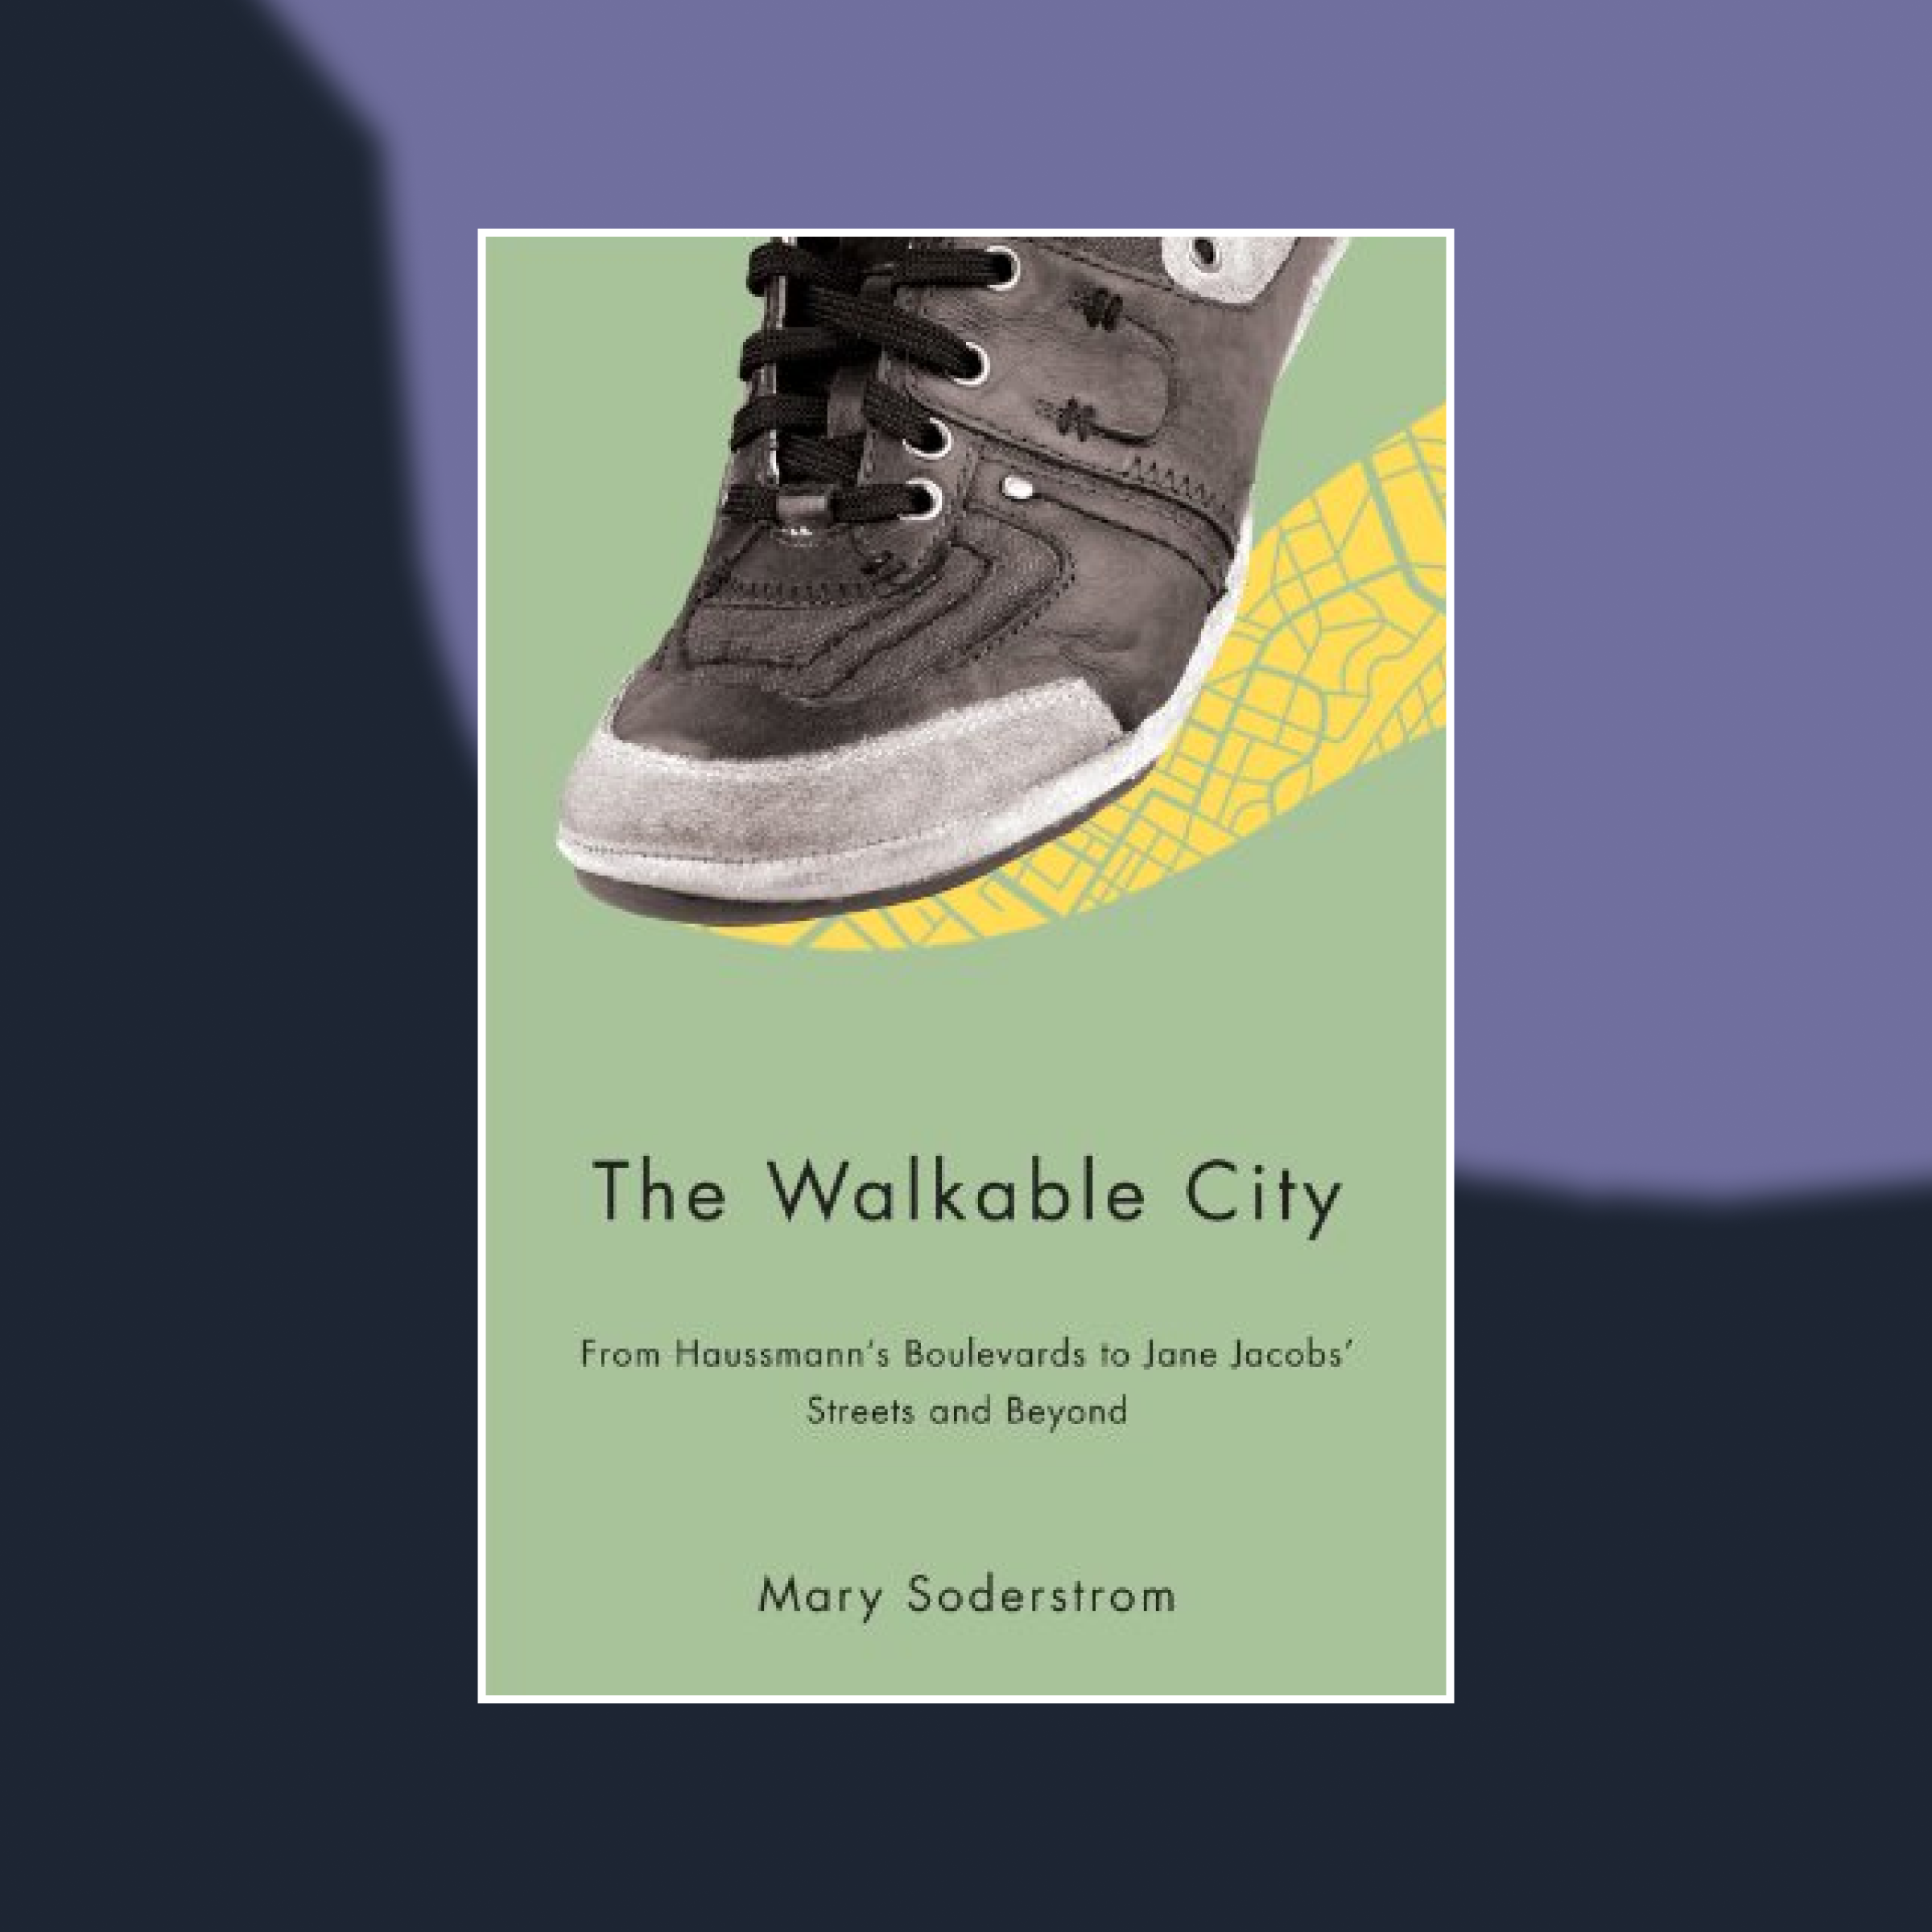 Book cover of The Walkable City against an abstract painted background